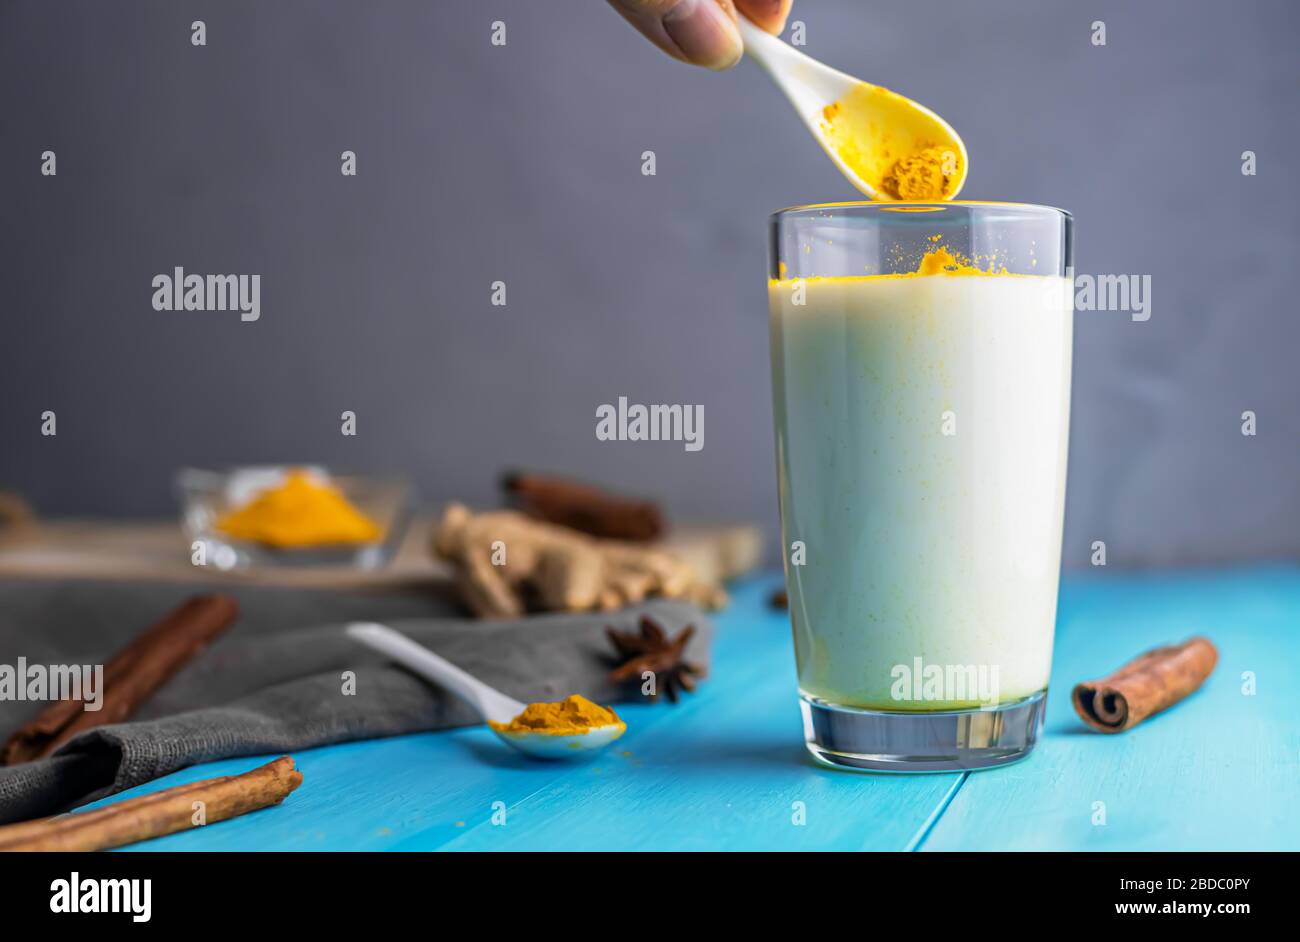 turmeric is poured into milk for golden milk, milk with turmeric, spices. with a drinking tube. on a blue wooden background. with copy space Stock Photo